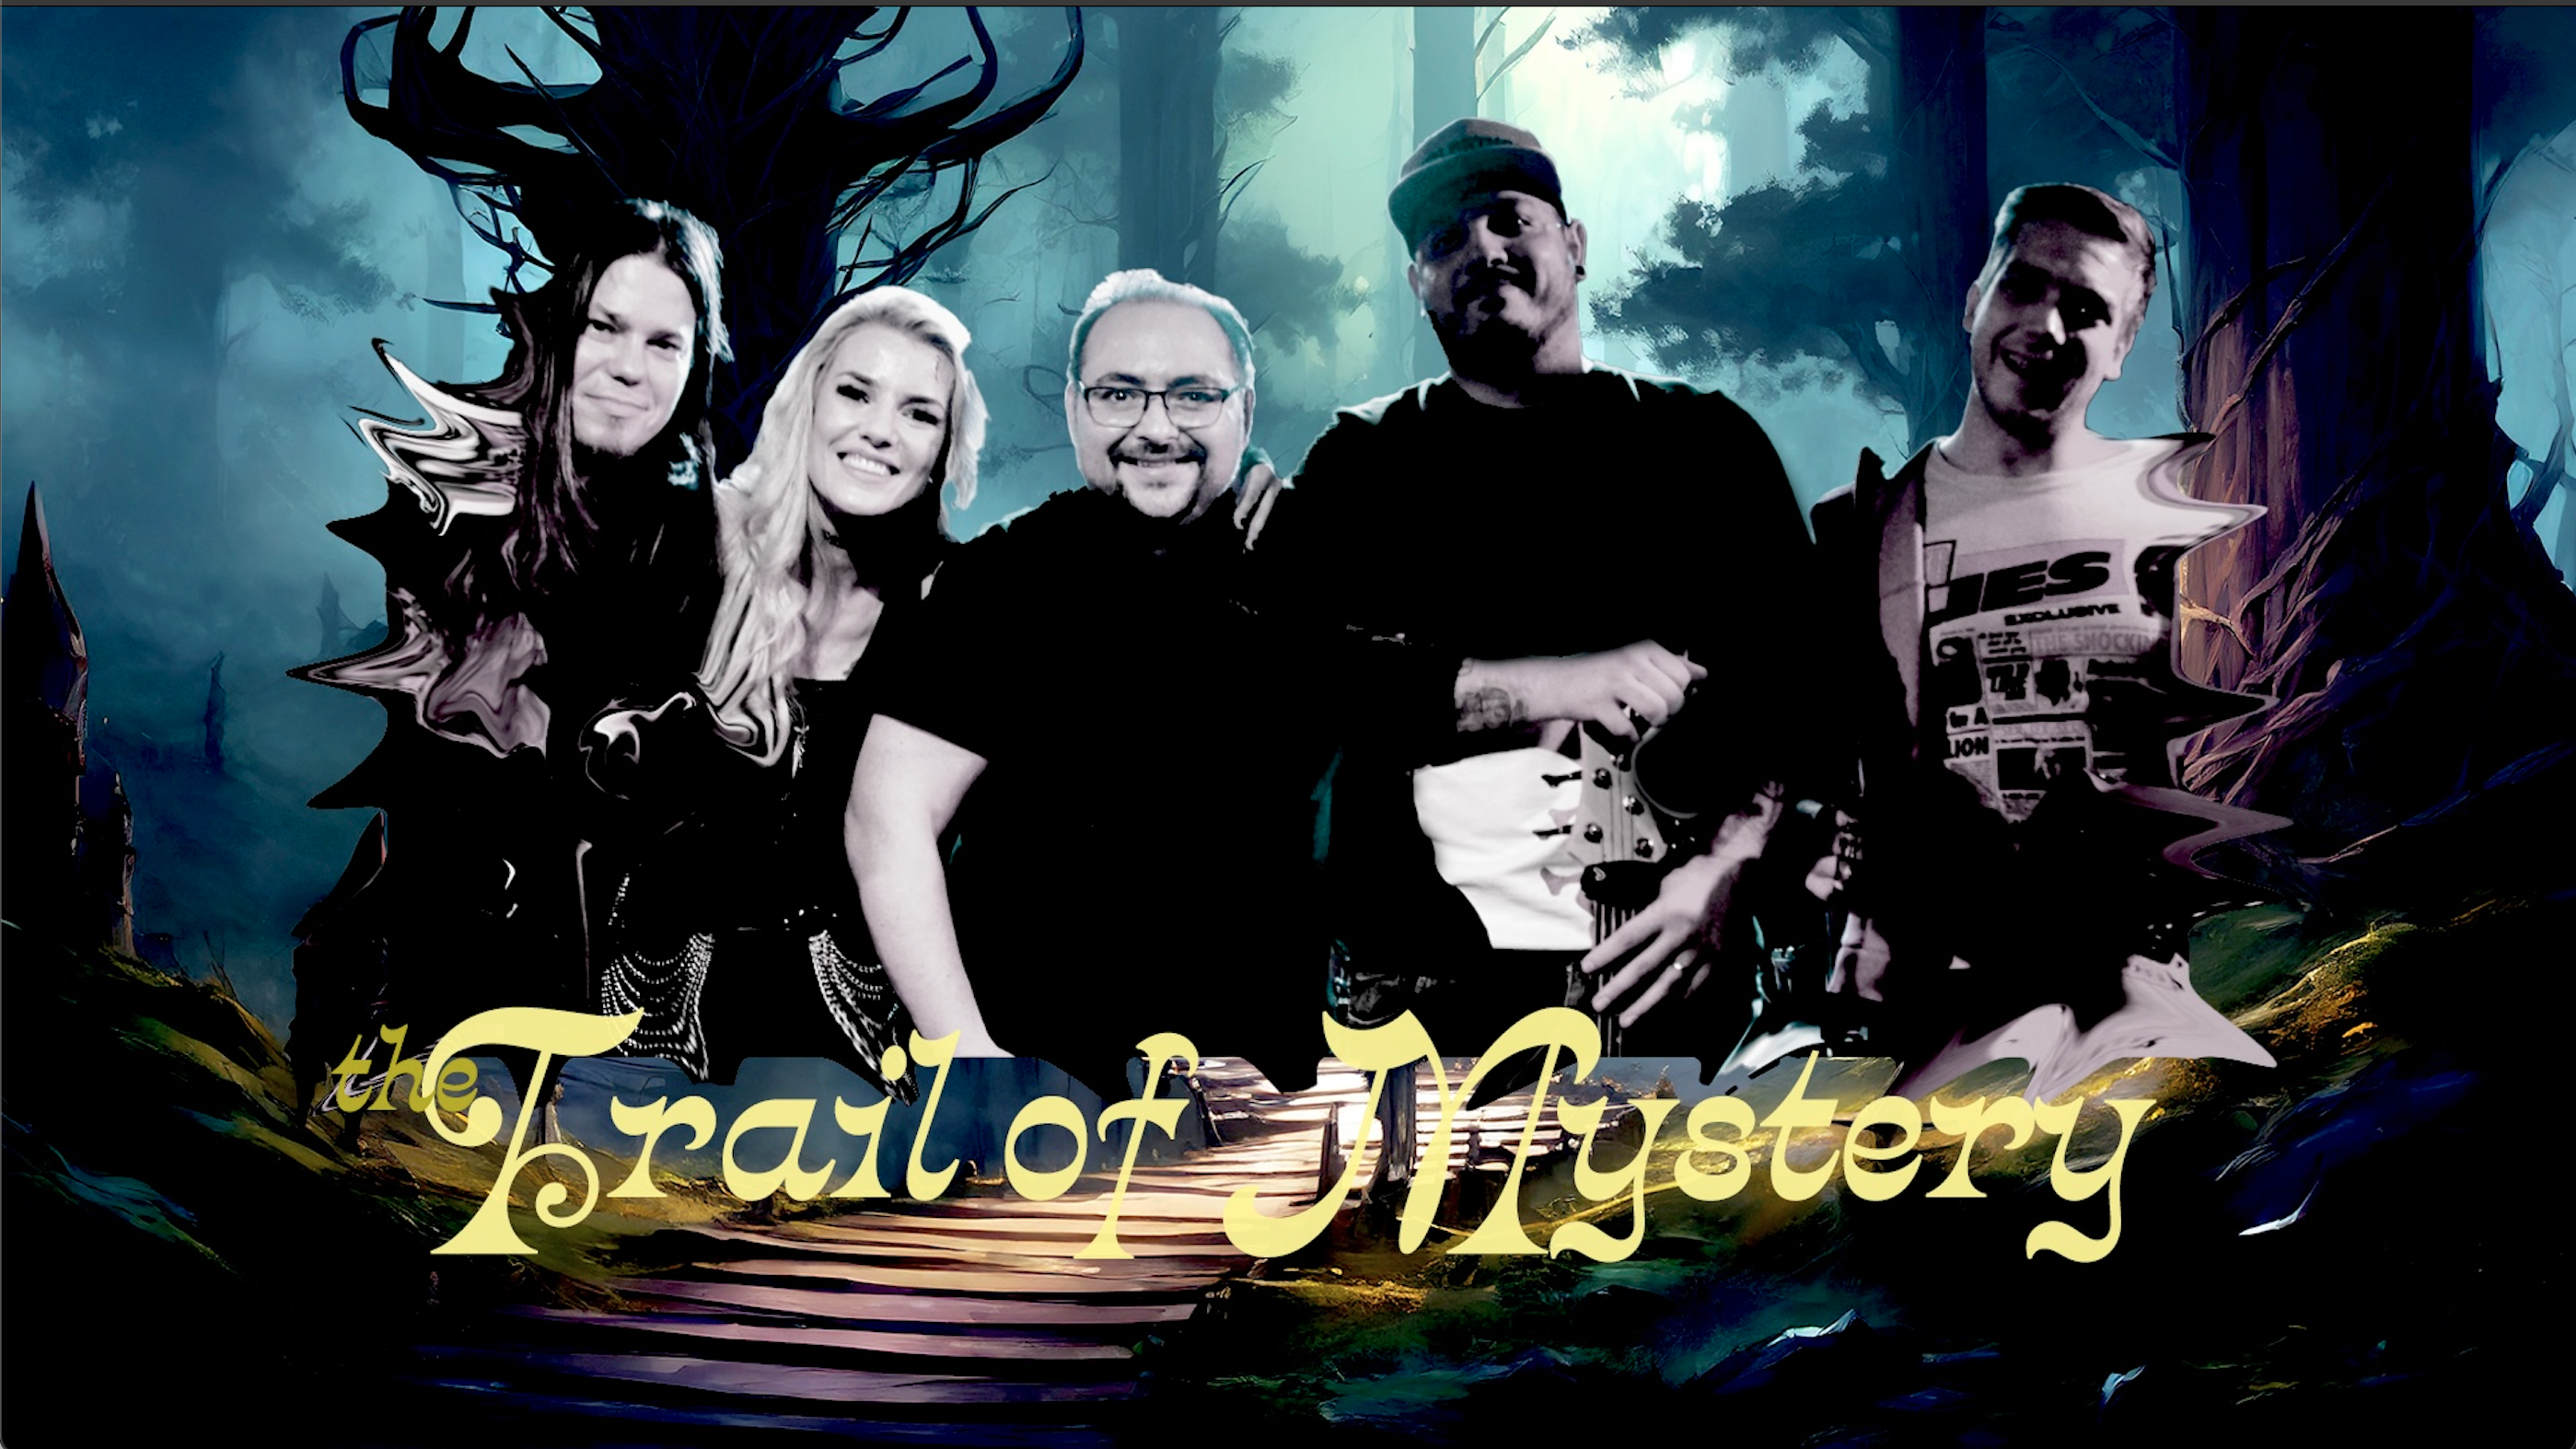 The Trail of Mystery